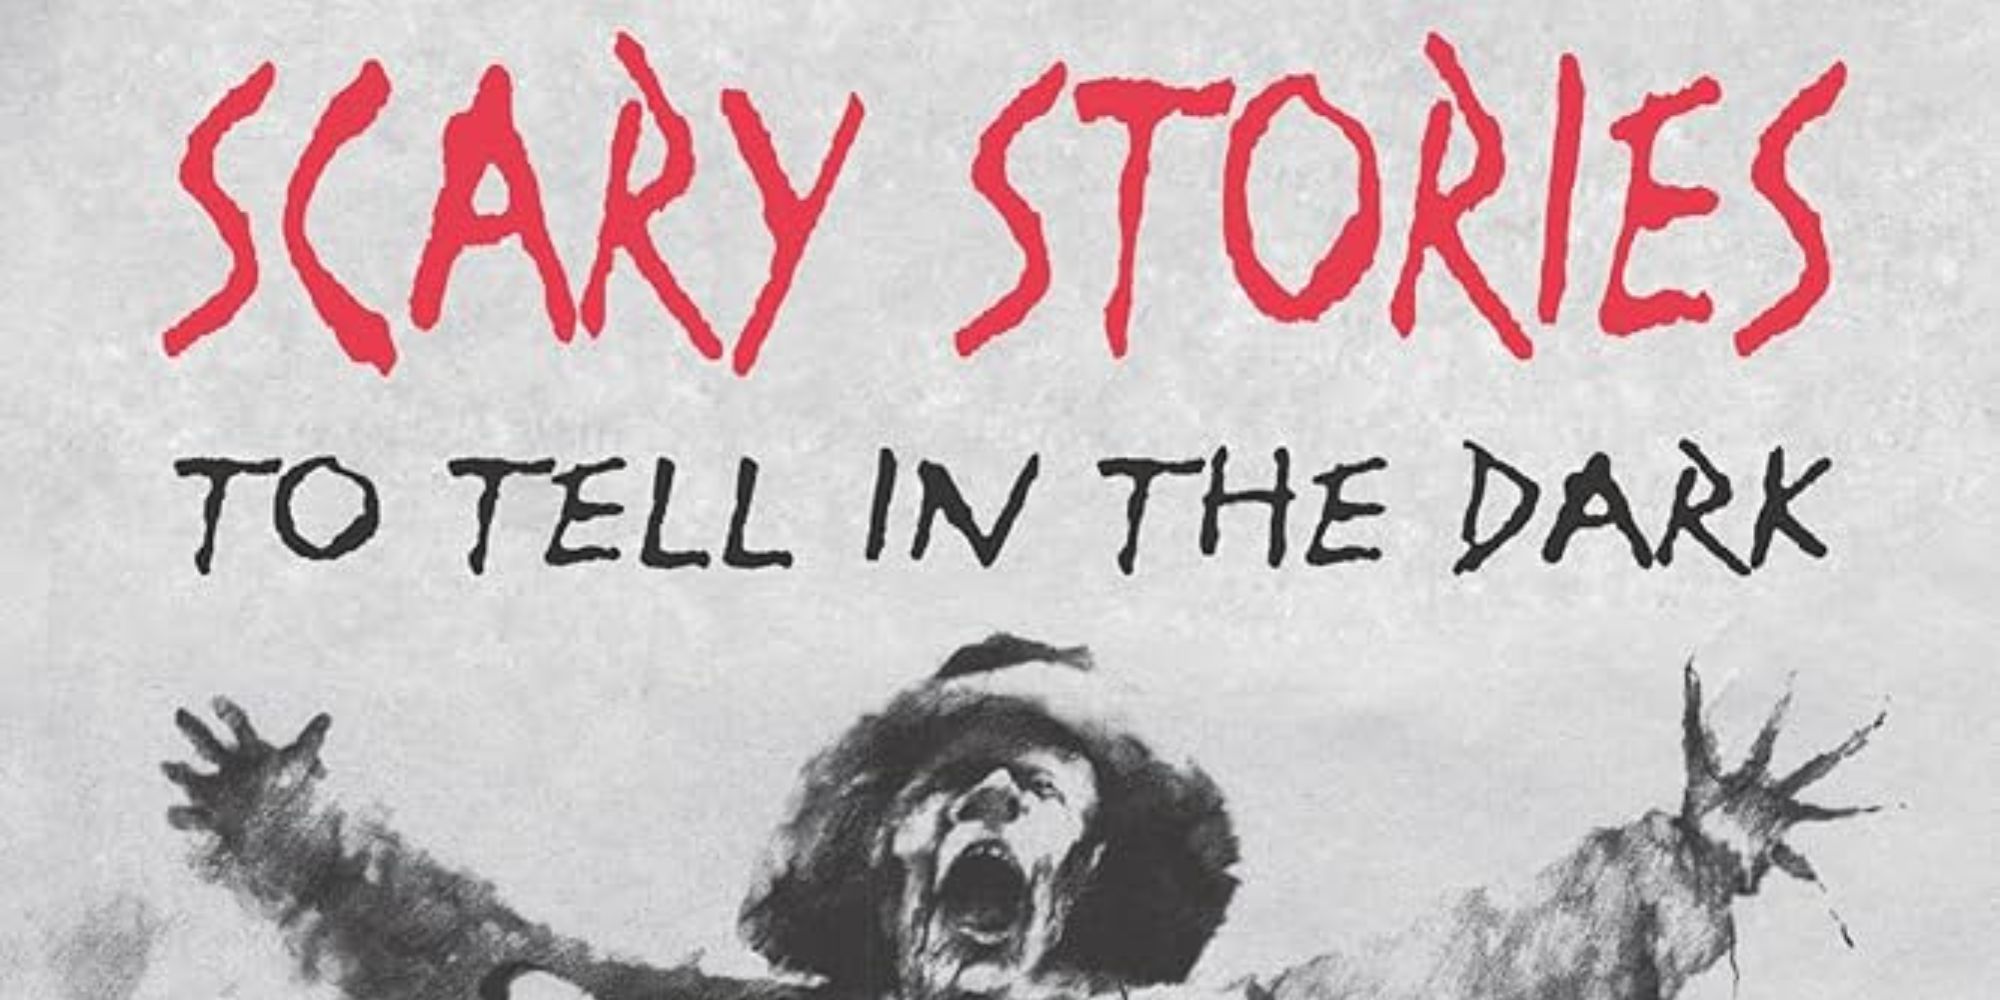 Scary stories to tell in the dark book cover cropped